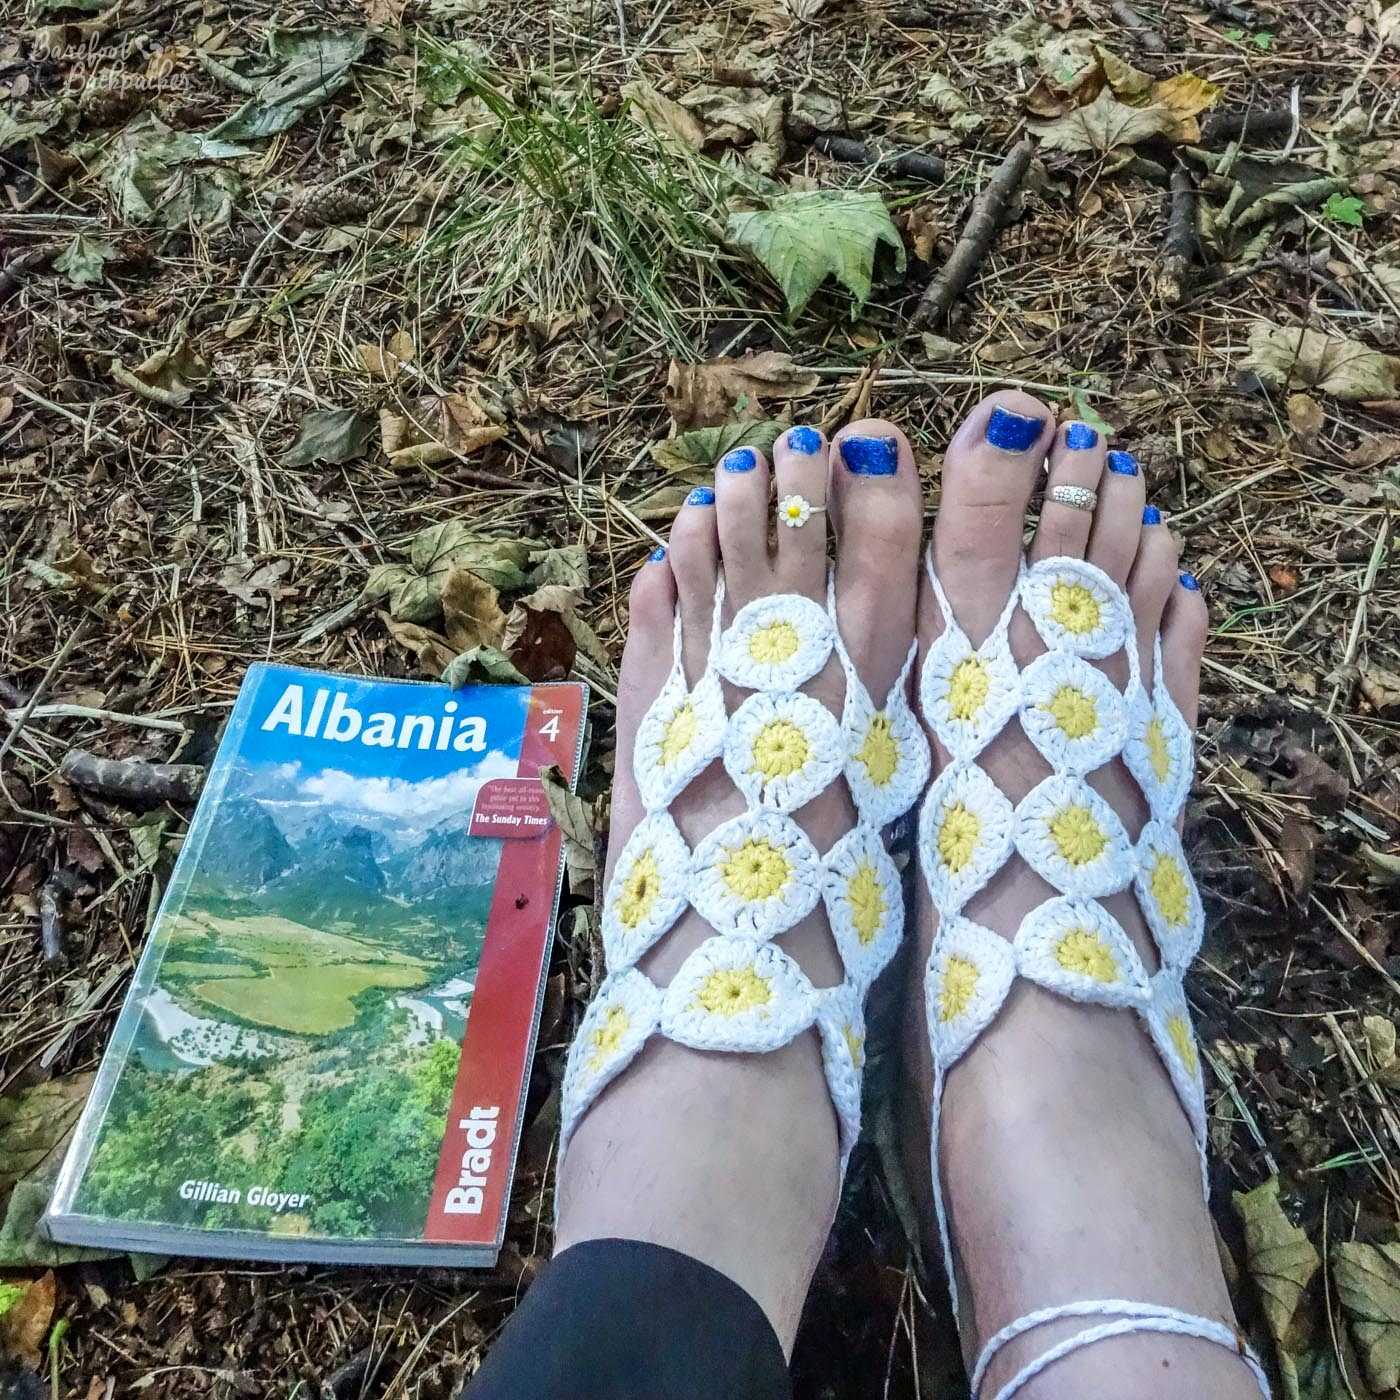 Feet in the daisy barefoot sandals, in a woodland. All ten daisy motifs can be clearly seen, wrapping around the top of the feet. The toenails are bright blue. Next to the feet is a Bradt Guide to Albania.